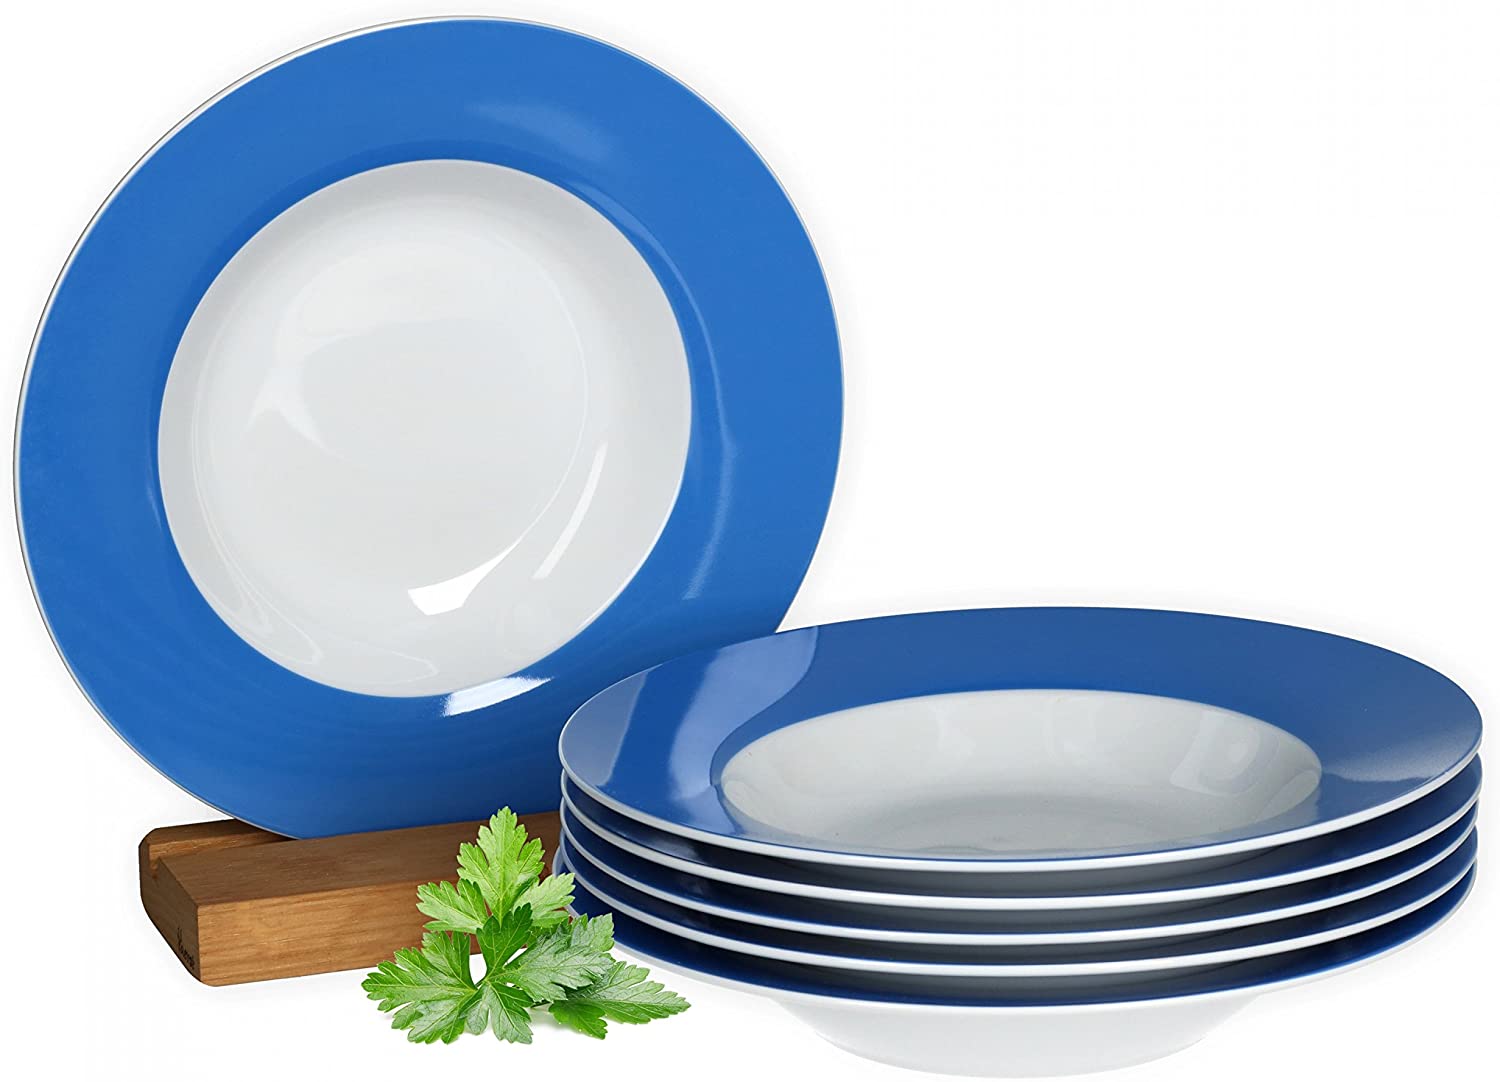 Van Well Vario Soup Plate Set 6 Pieces I Plate Service for 6 People I Deep Pasta Plate 21.5 cm I Porcelain Set White with Blue Rim I Salad Plate Microwavable